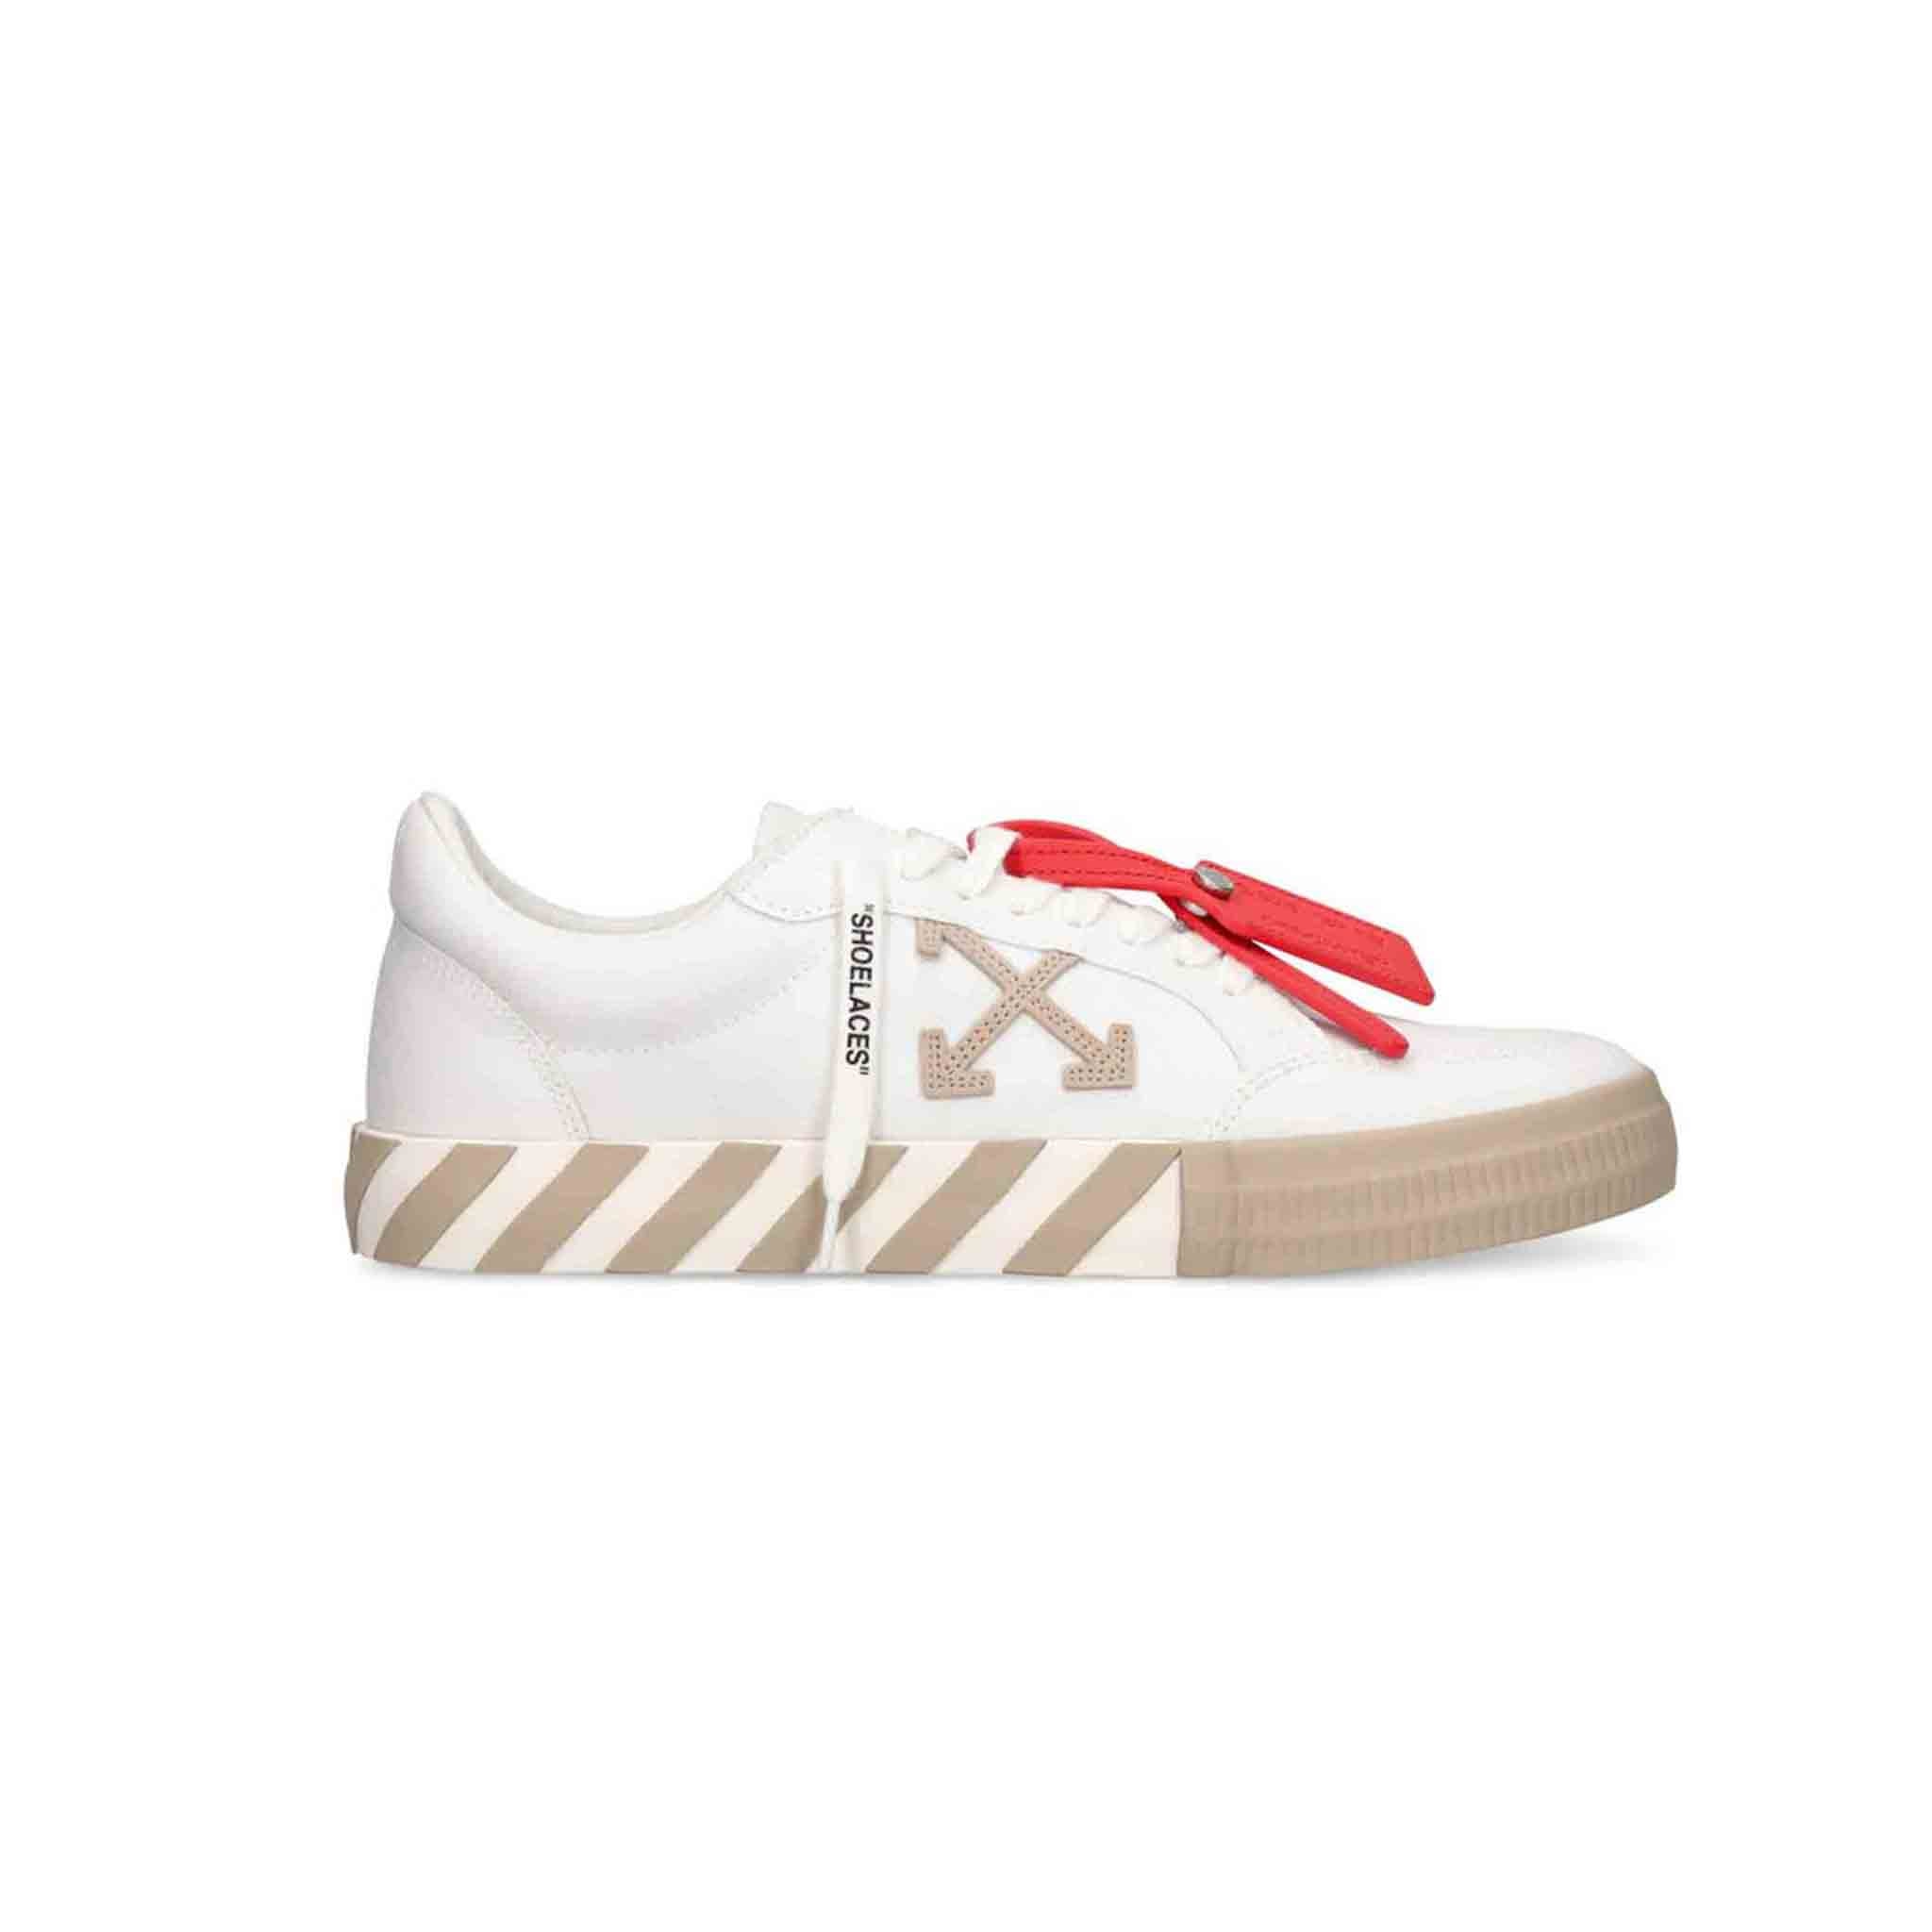 OFF-WHITE Low Vulcanized Canvas in White/Sand